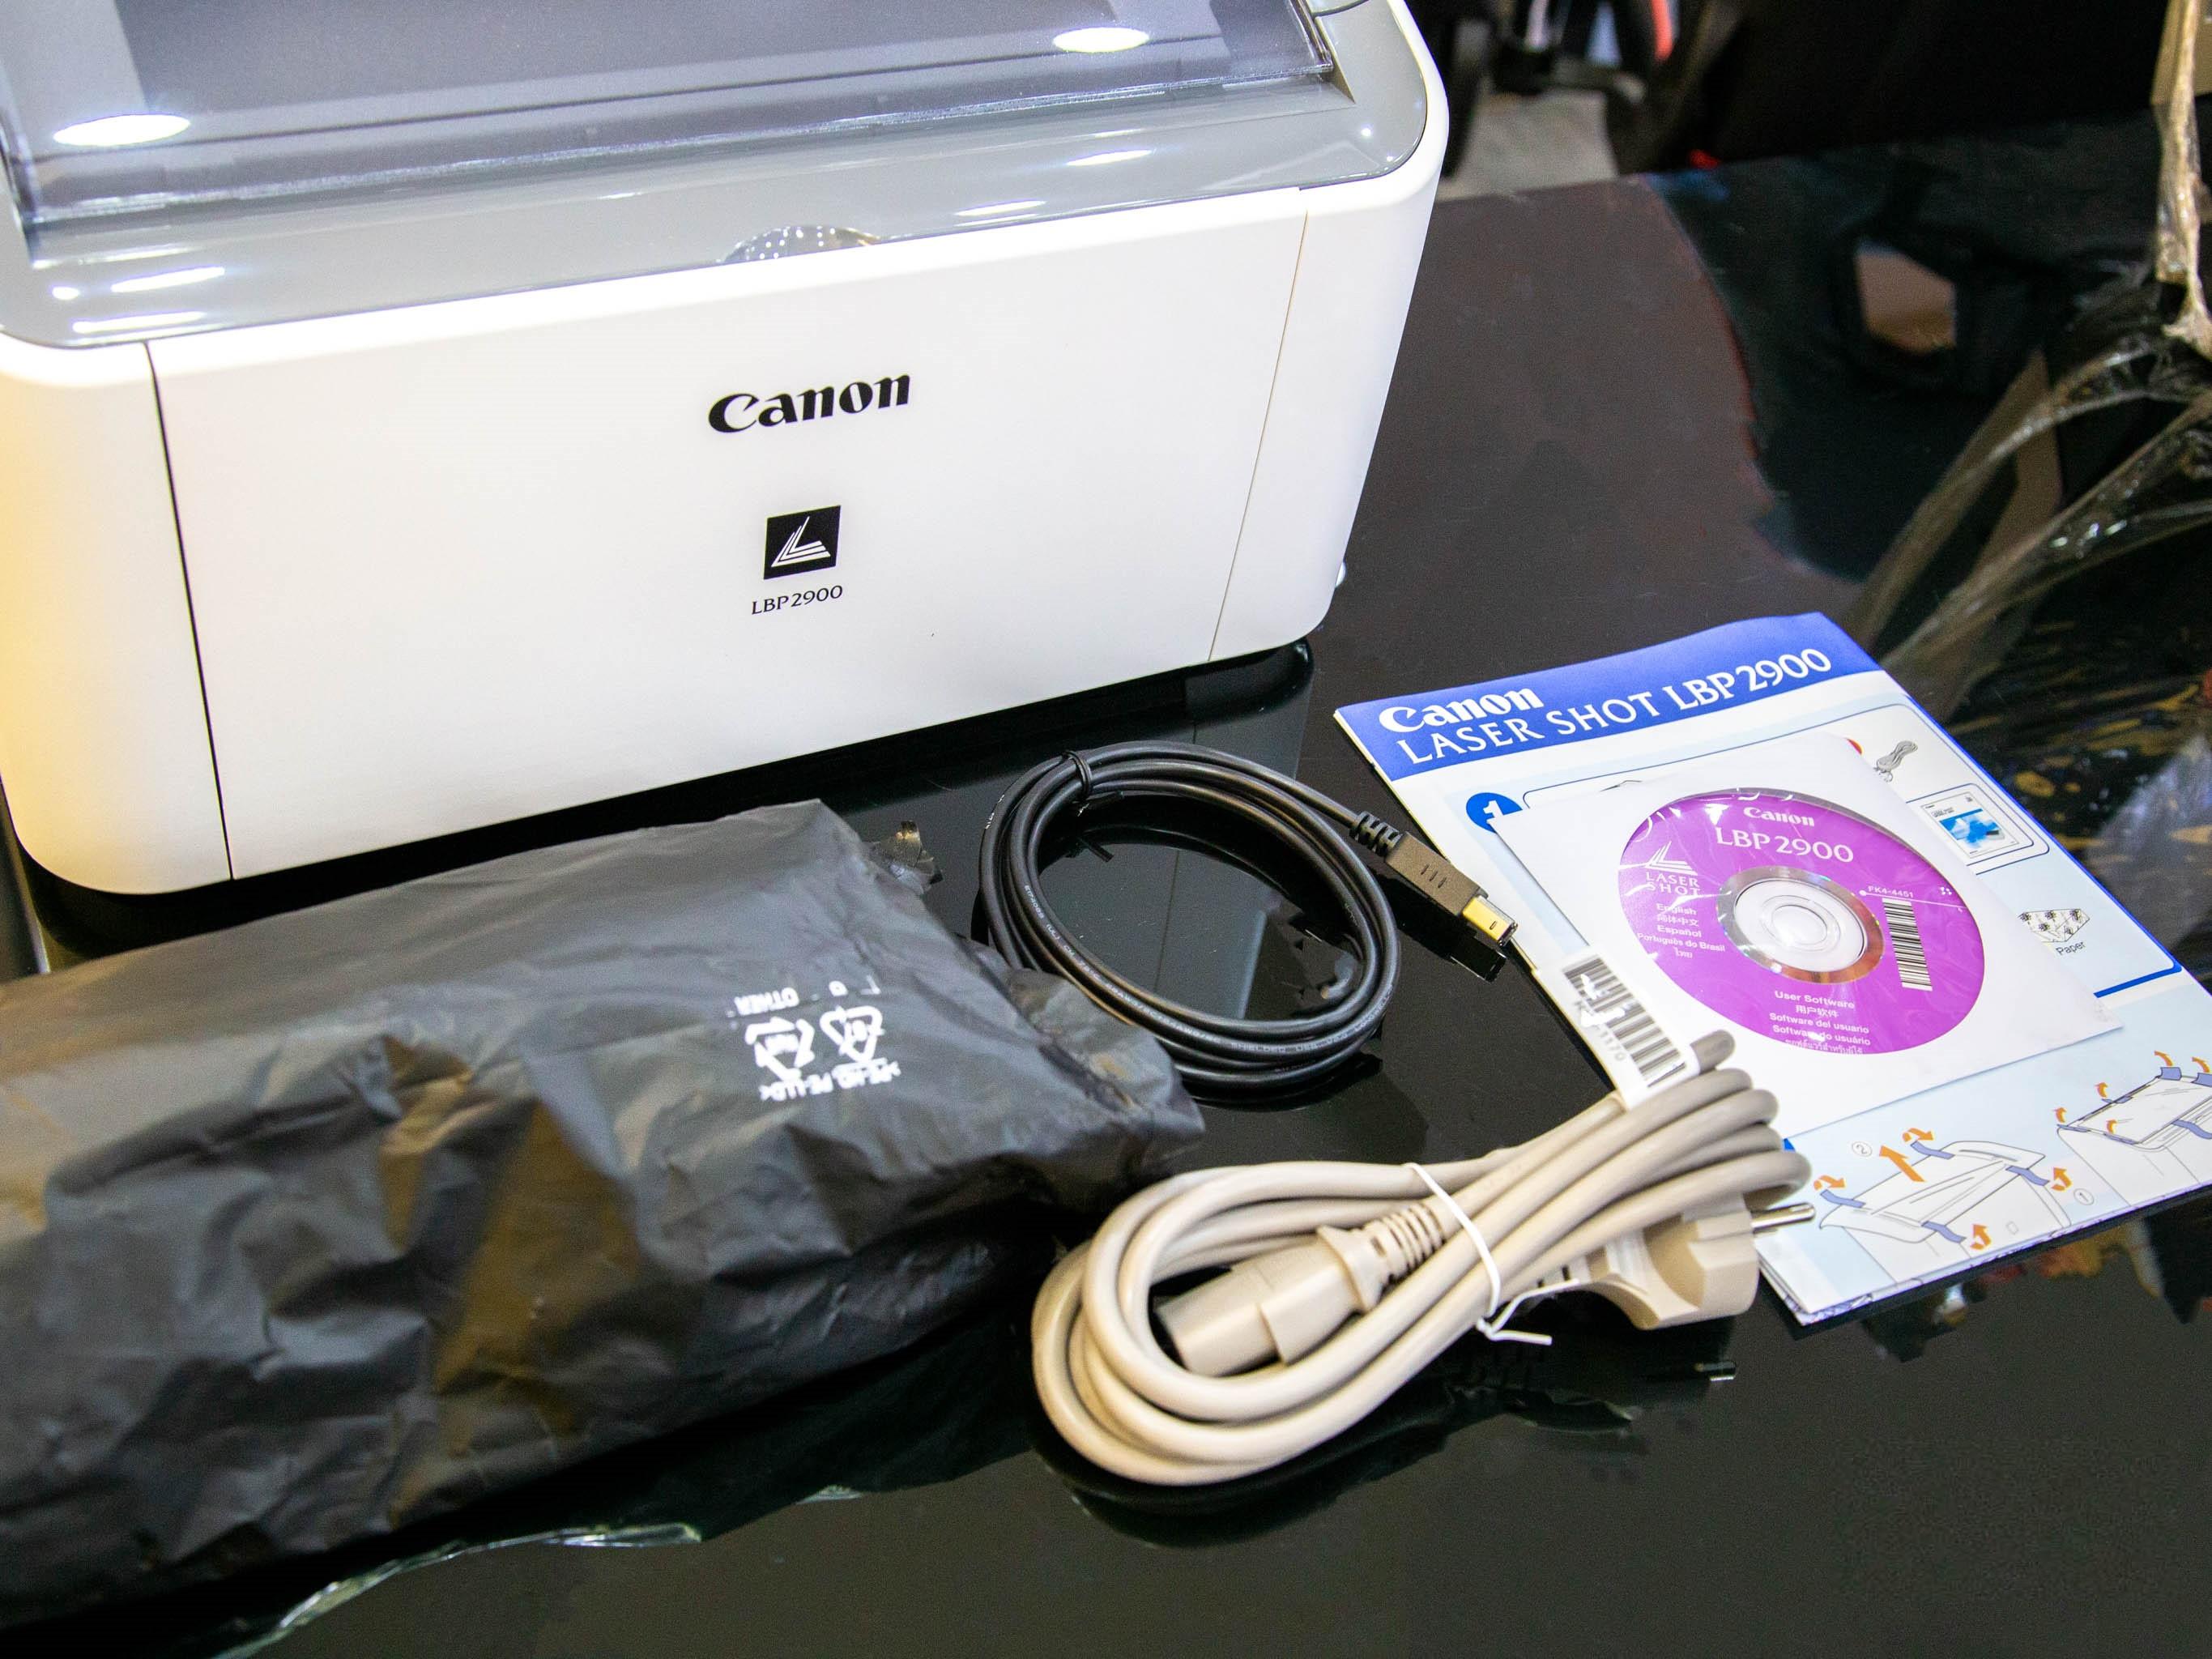 may-in-canon-laser-printer-lbp-2900